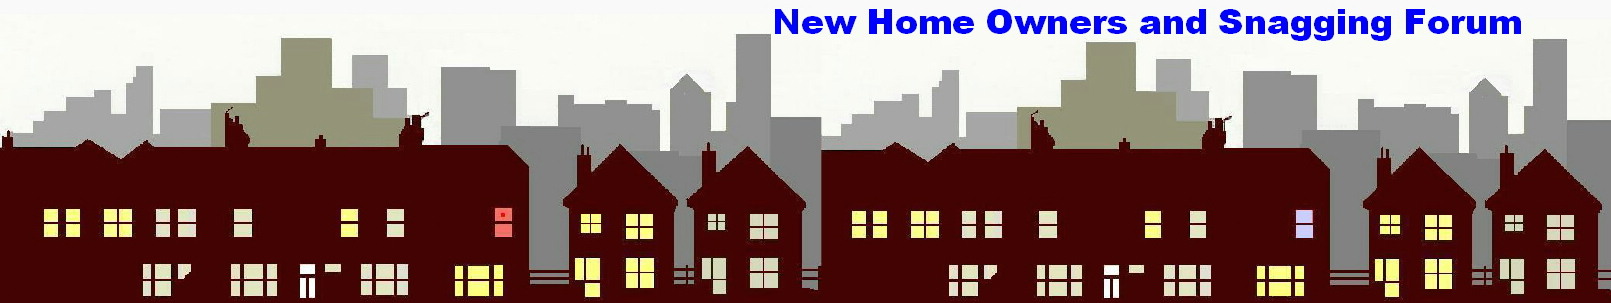 New Home Owners And Snagging Forum